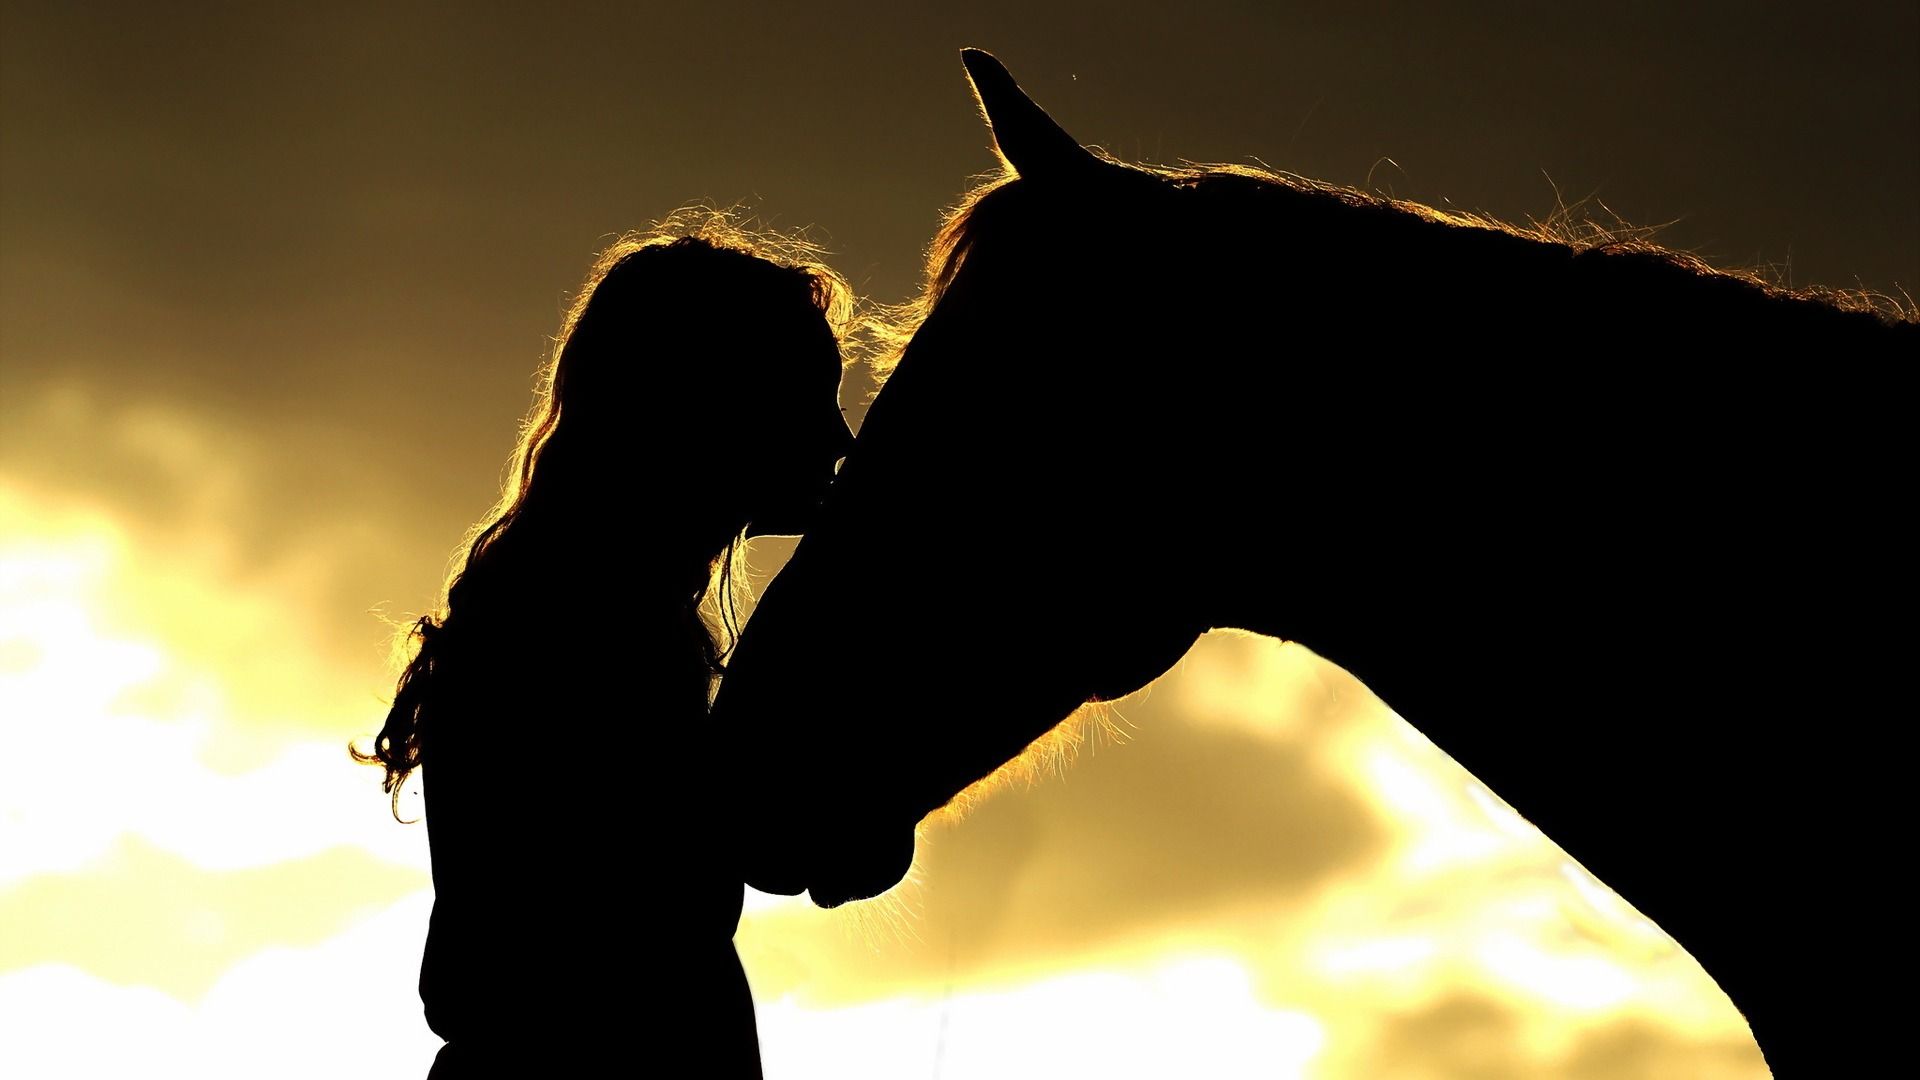 Download wallpaper girl horse silhouettes, mood resolution 1920x1080. Horse silhouette, Dog silhouette, Silhouette